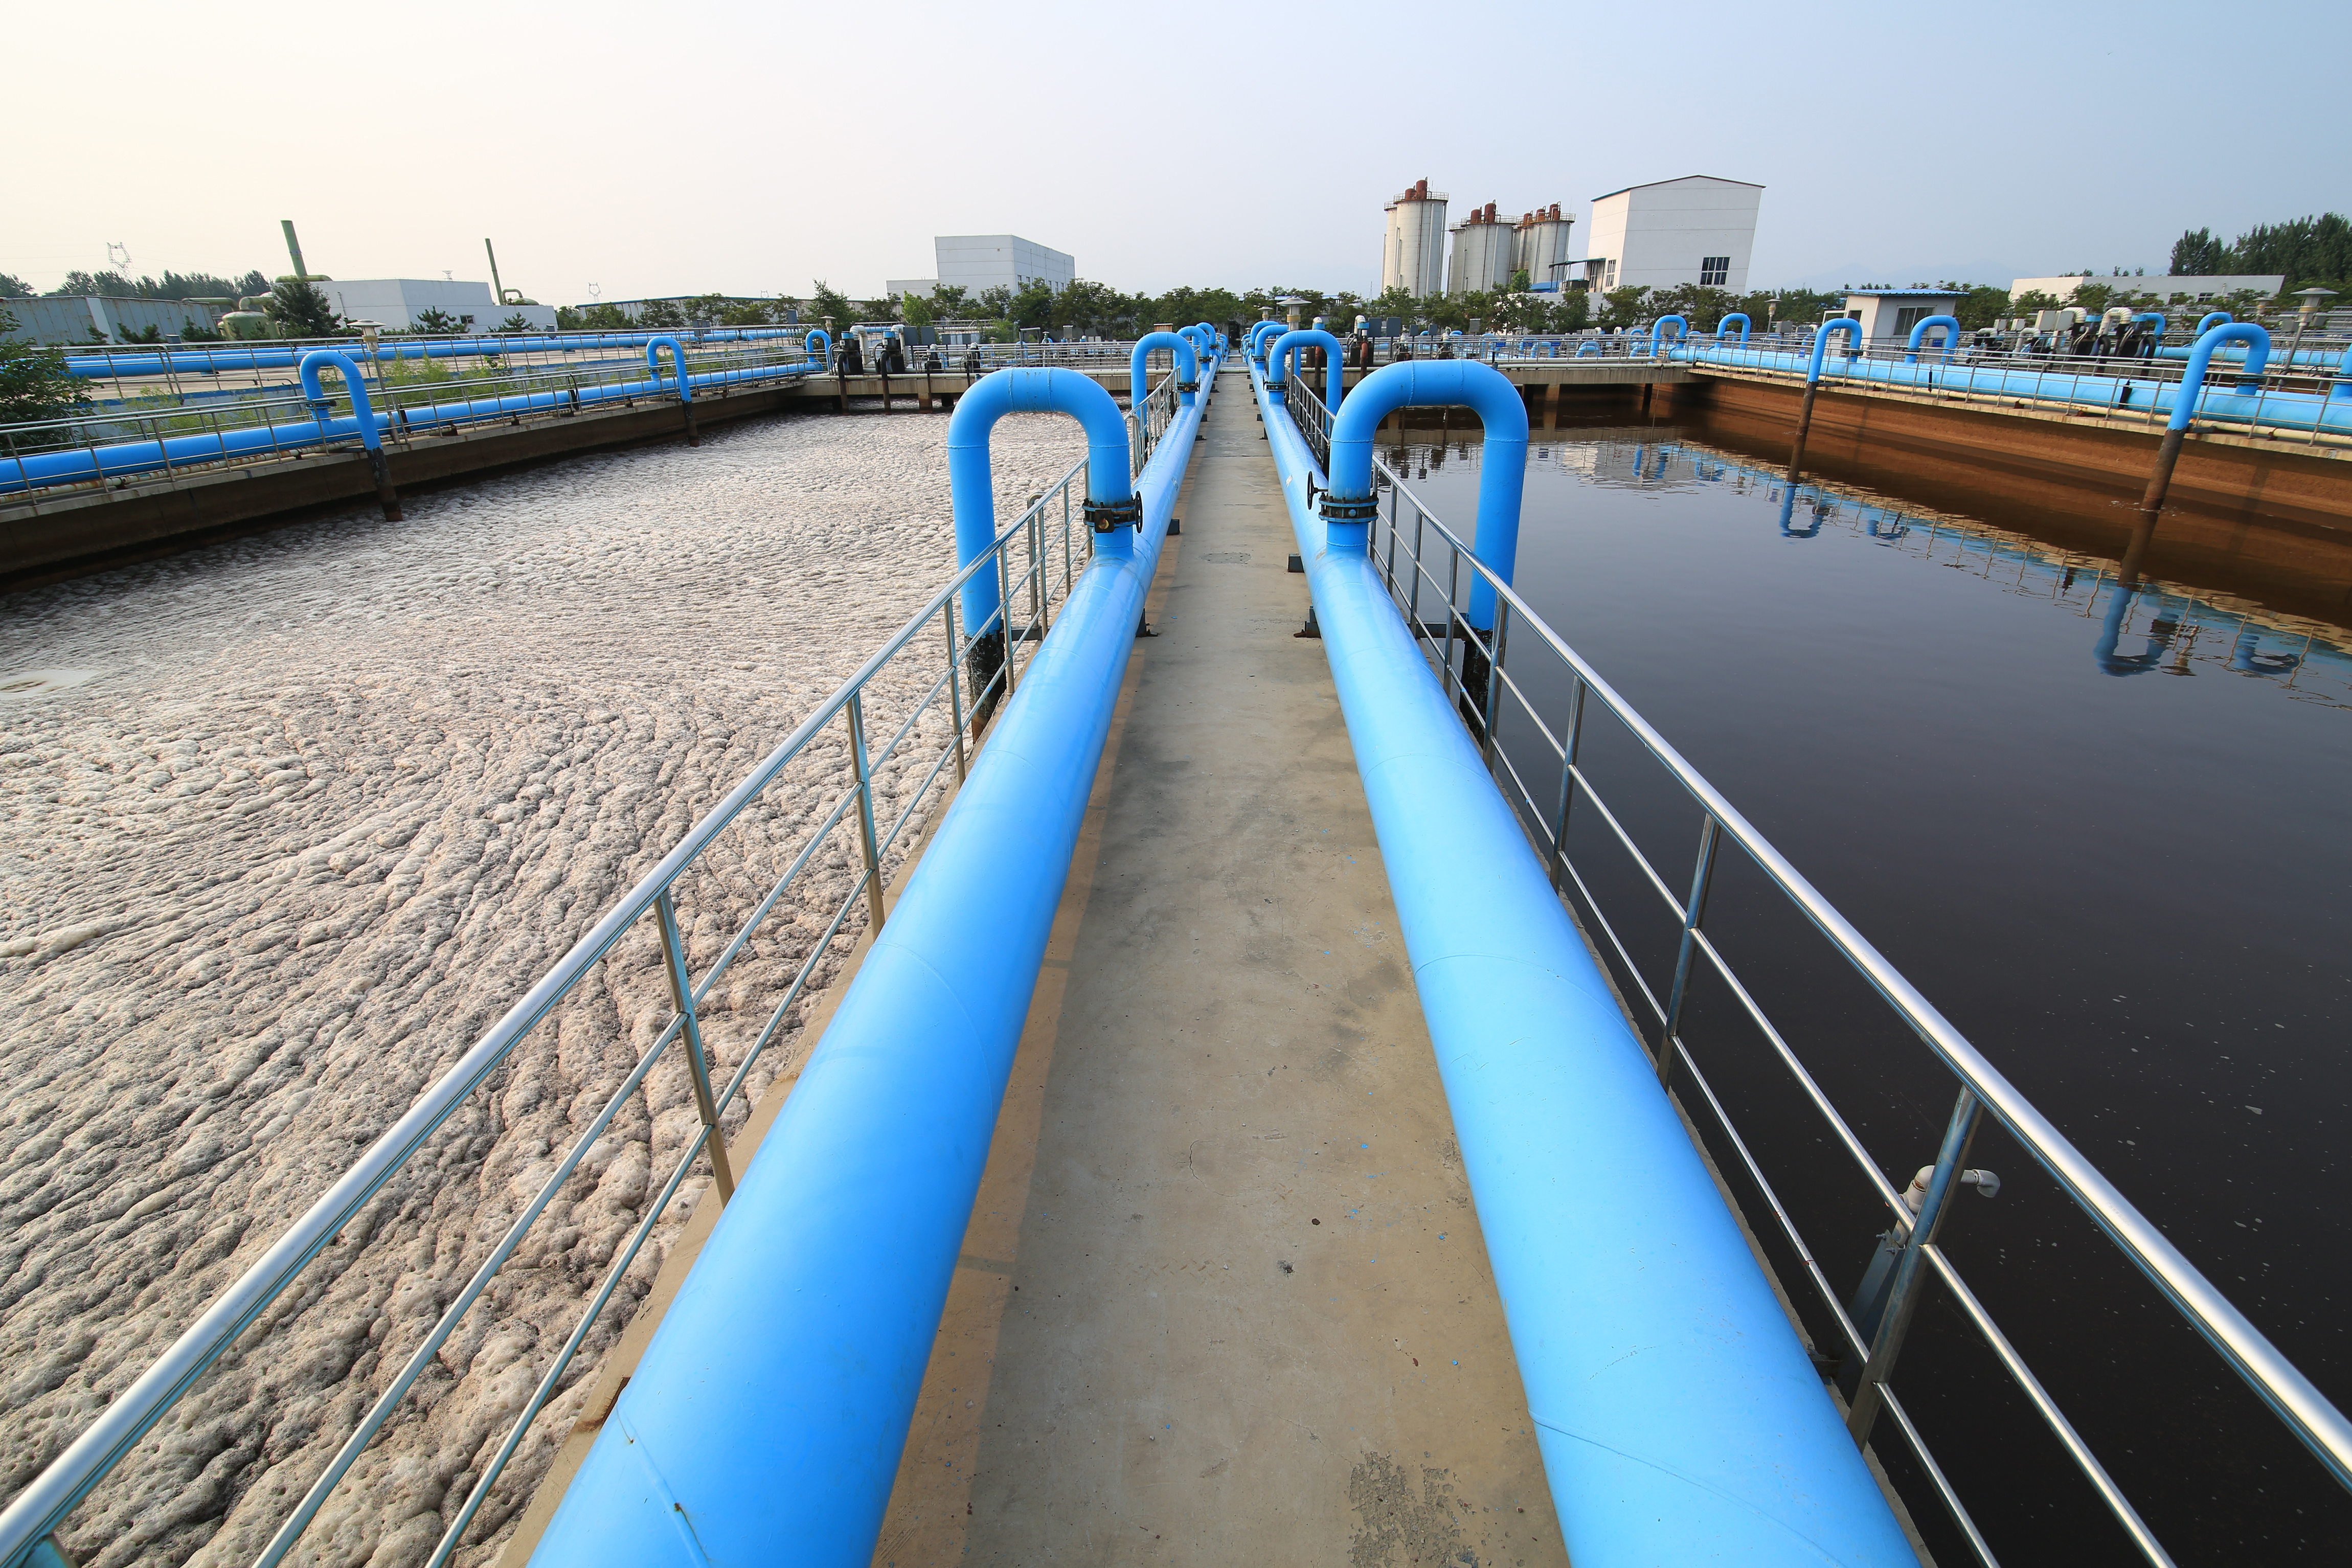 Wastewater treatment tank with aeration process